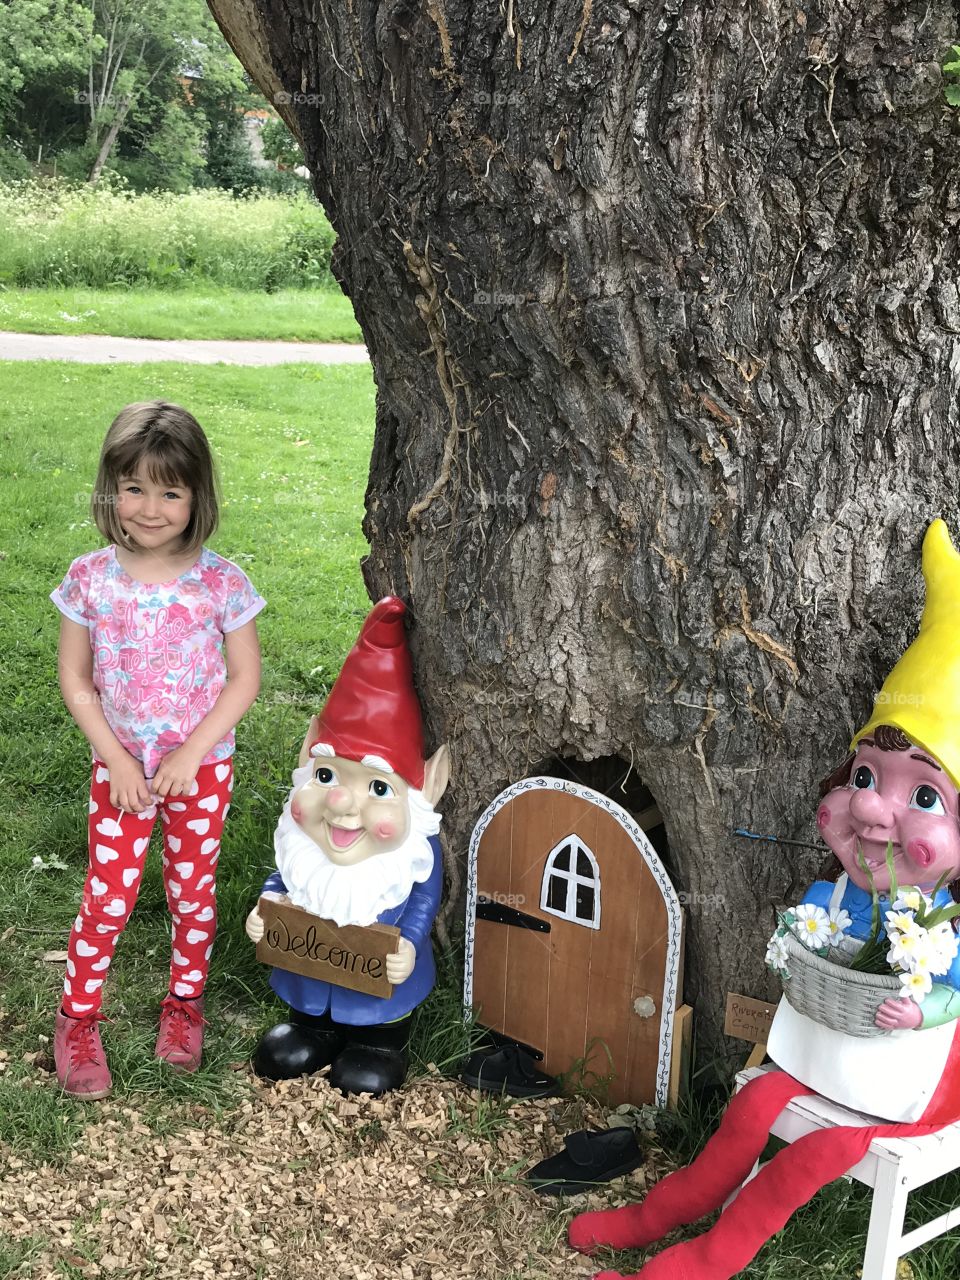 My daughter in Bewdley by the river captured with the gnomes and there tree house kindly created by a local resident for everyone’s pleasure 